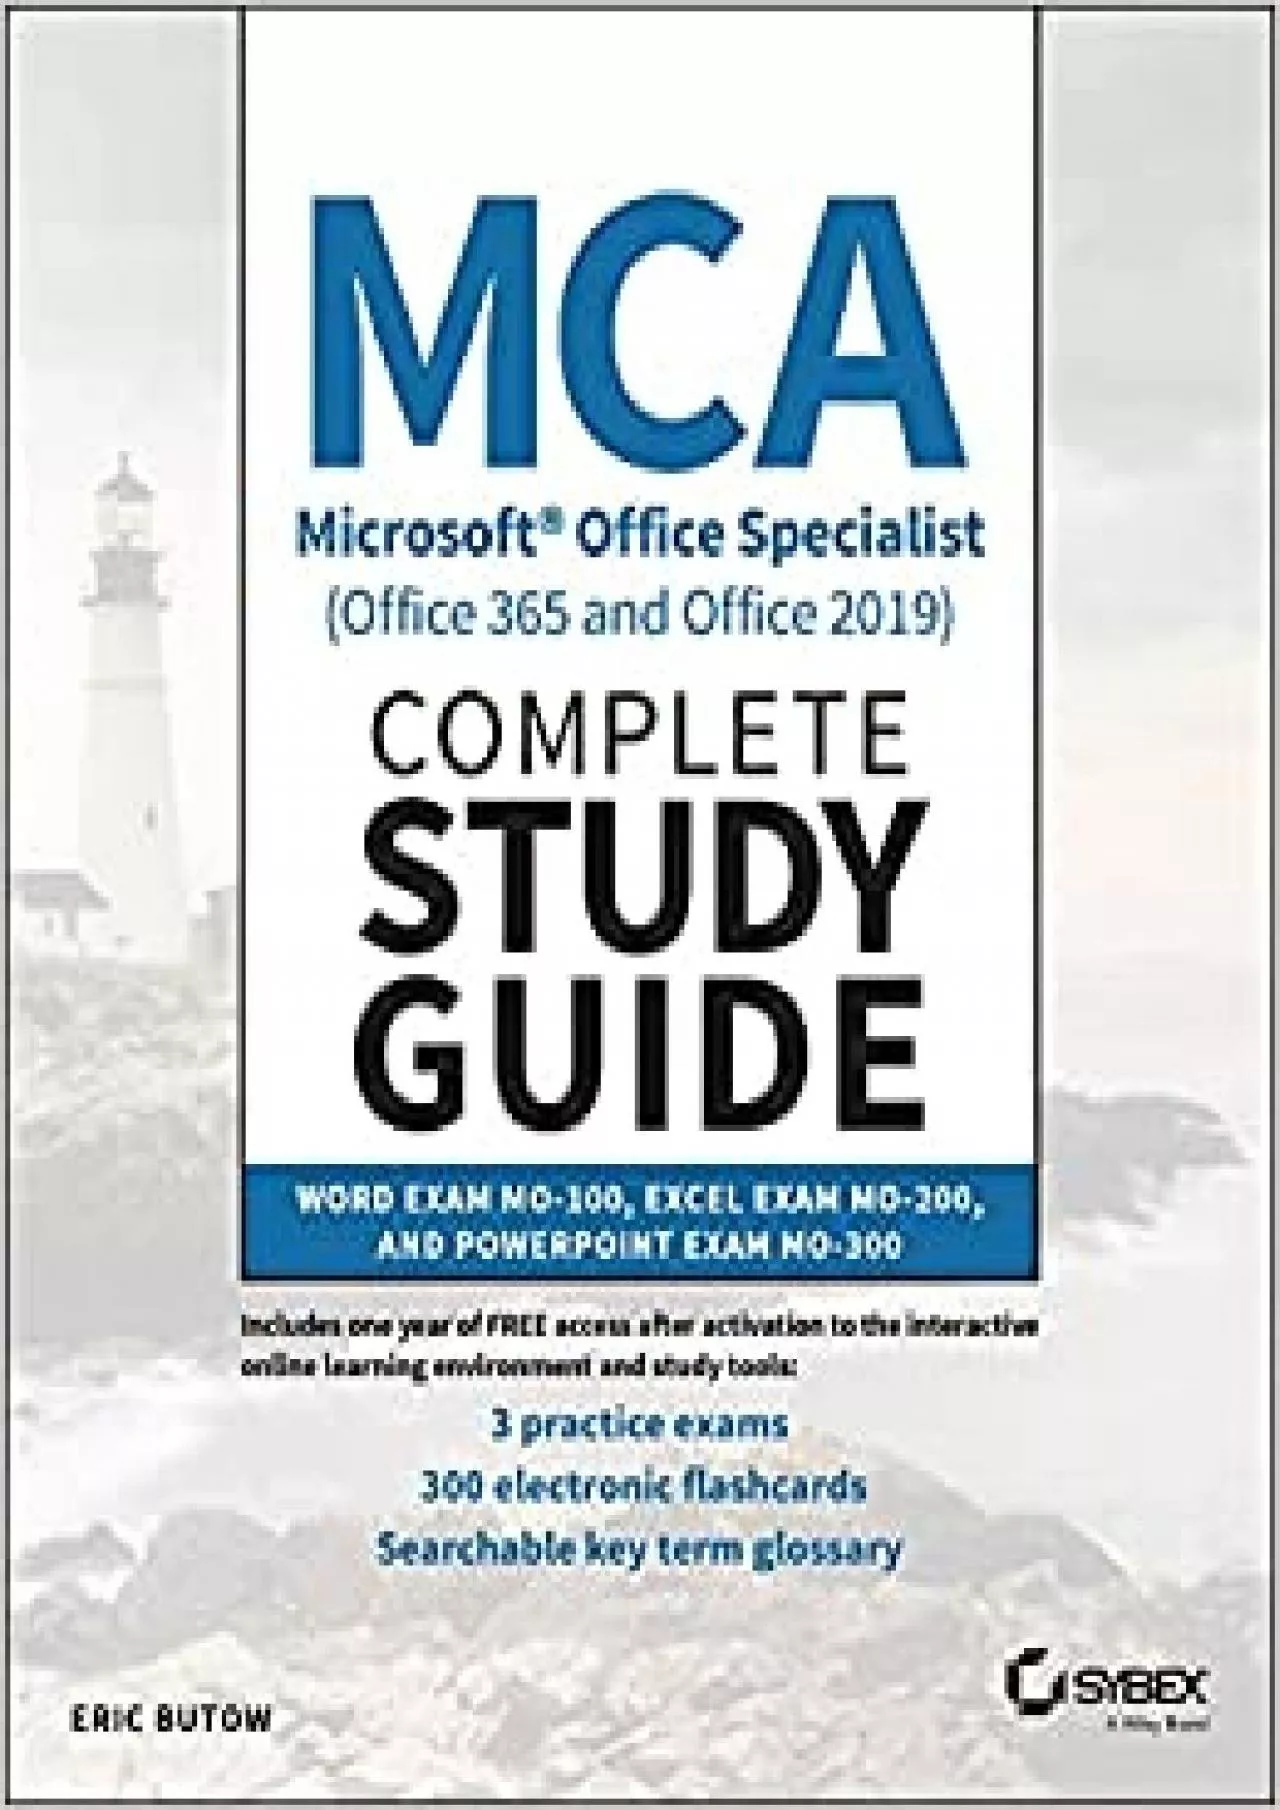 MCA Microsoft Office Specialist (Office 365 and Office 2019) Complete Study Guide: Word